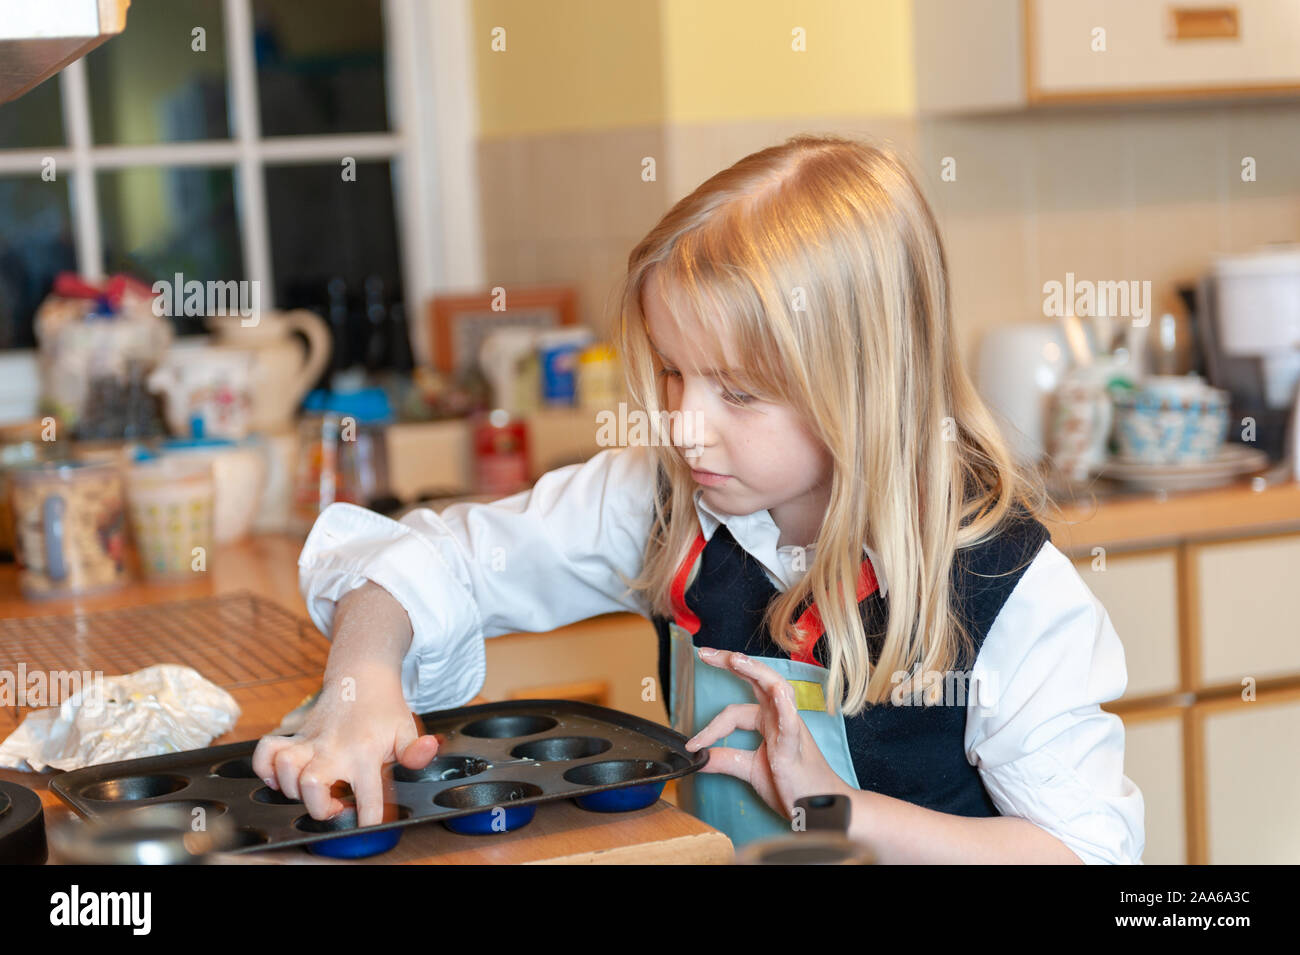 Pretty young blonde girl preparing to bake in a messy kitchen Stock Photo